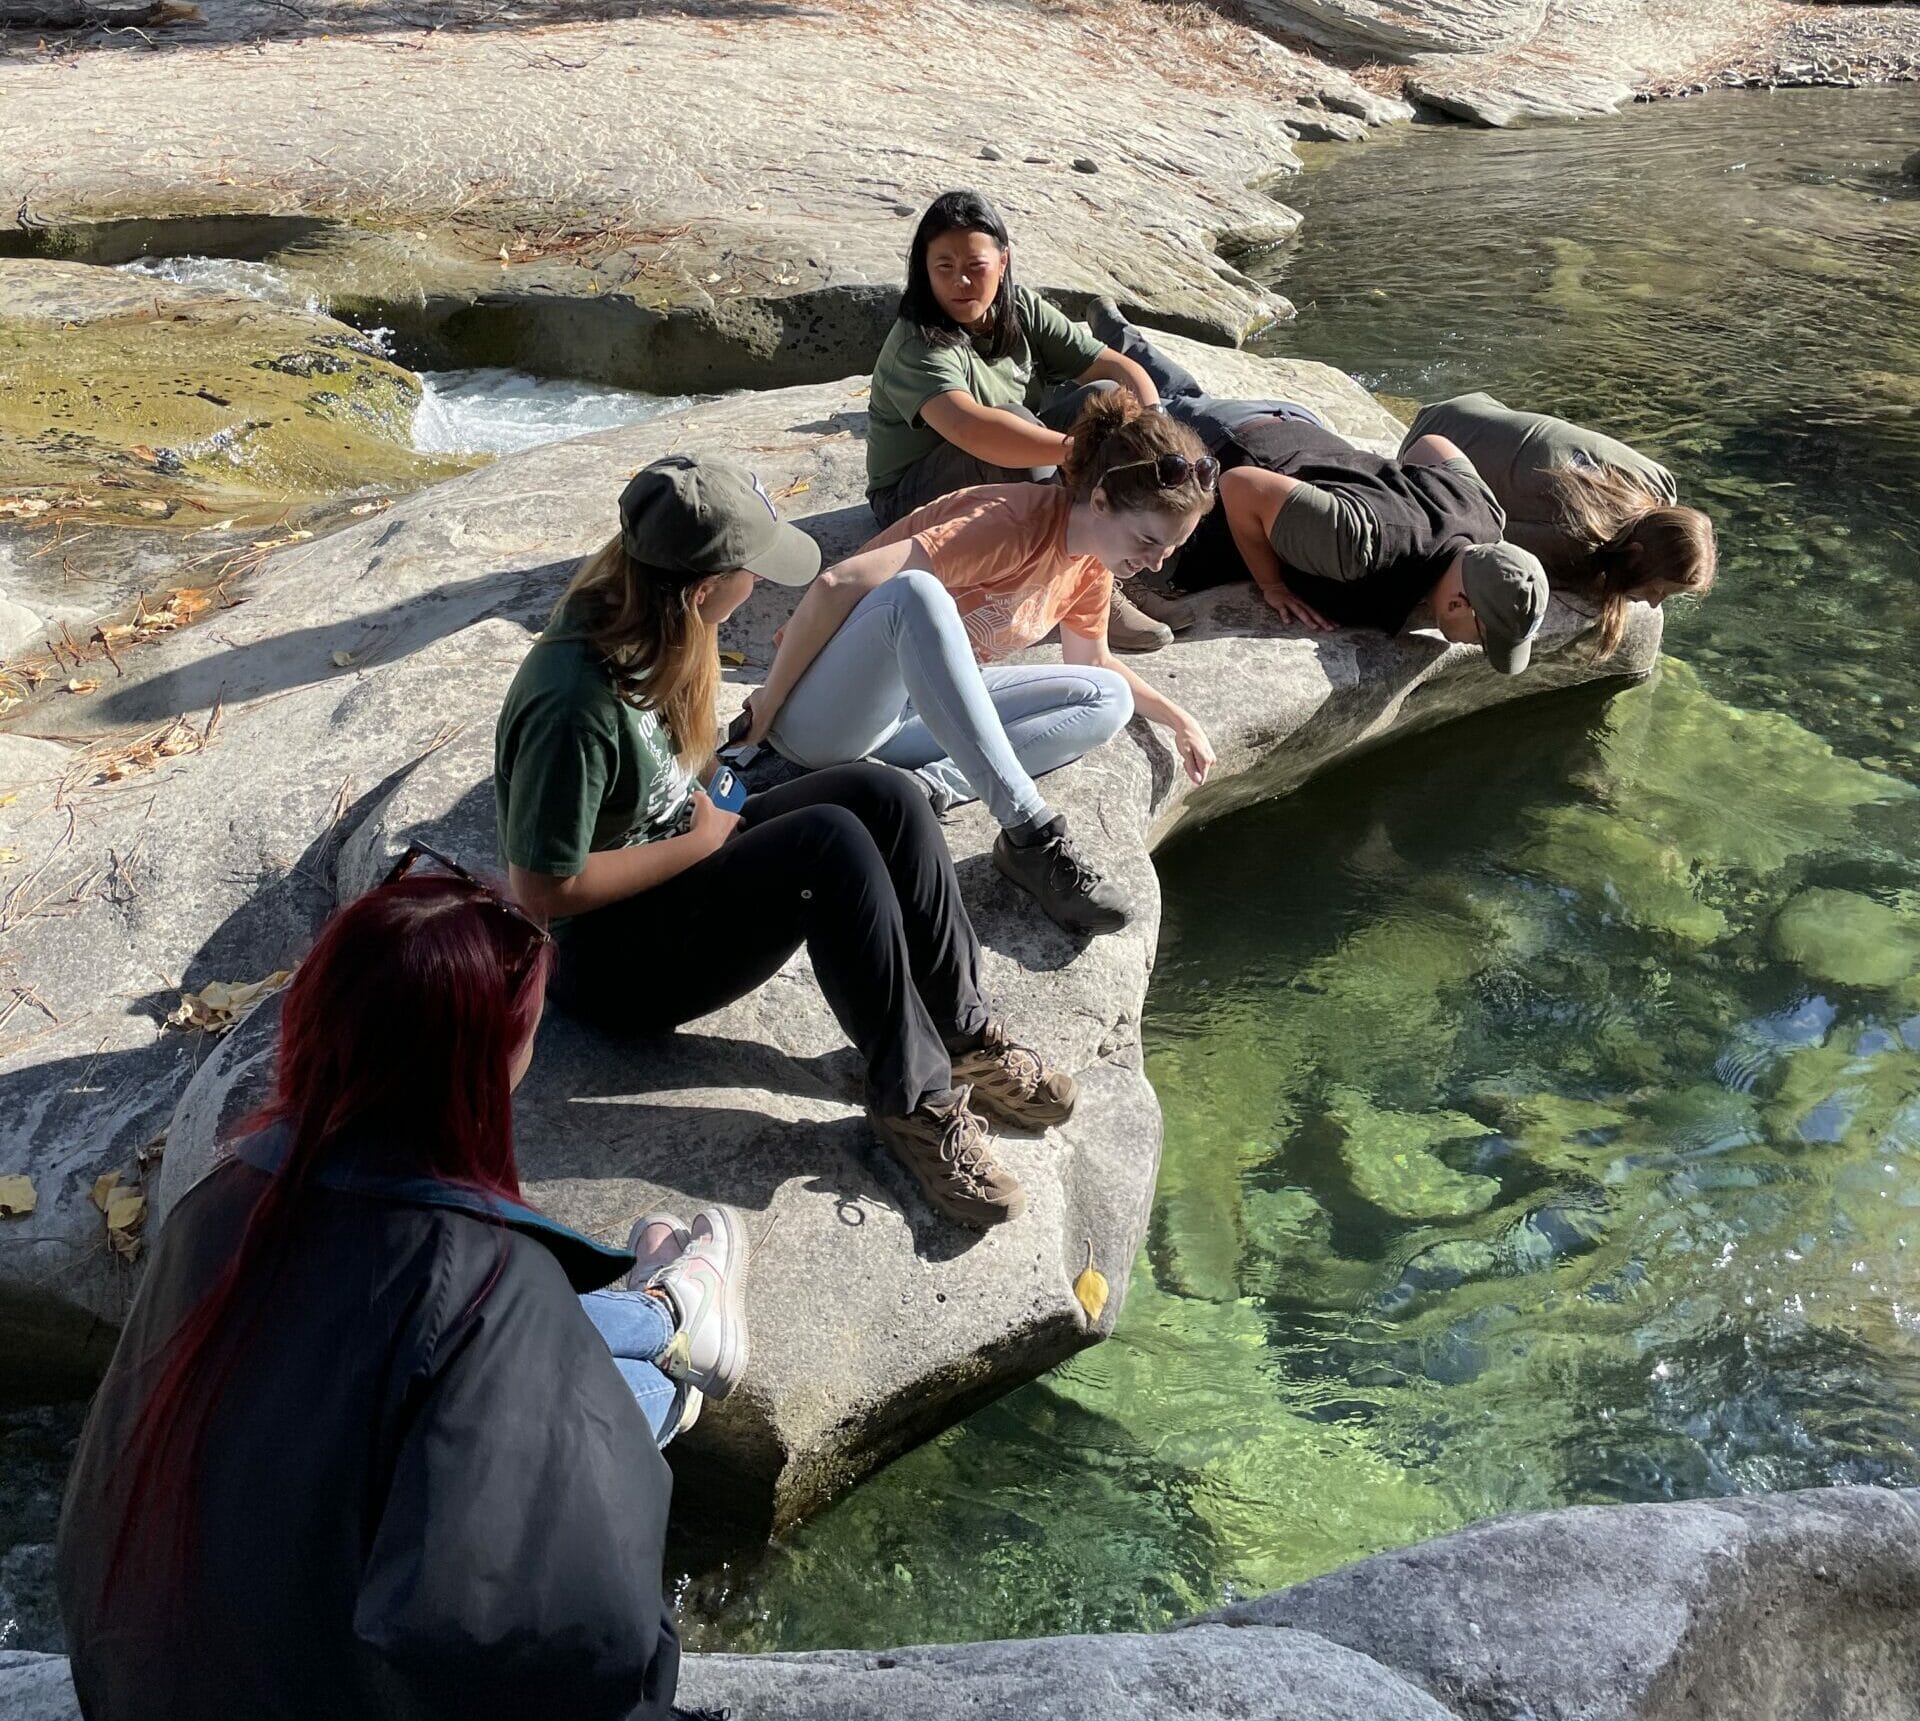 A group of six people sit on the sandstone bank of a clear river.